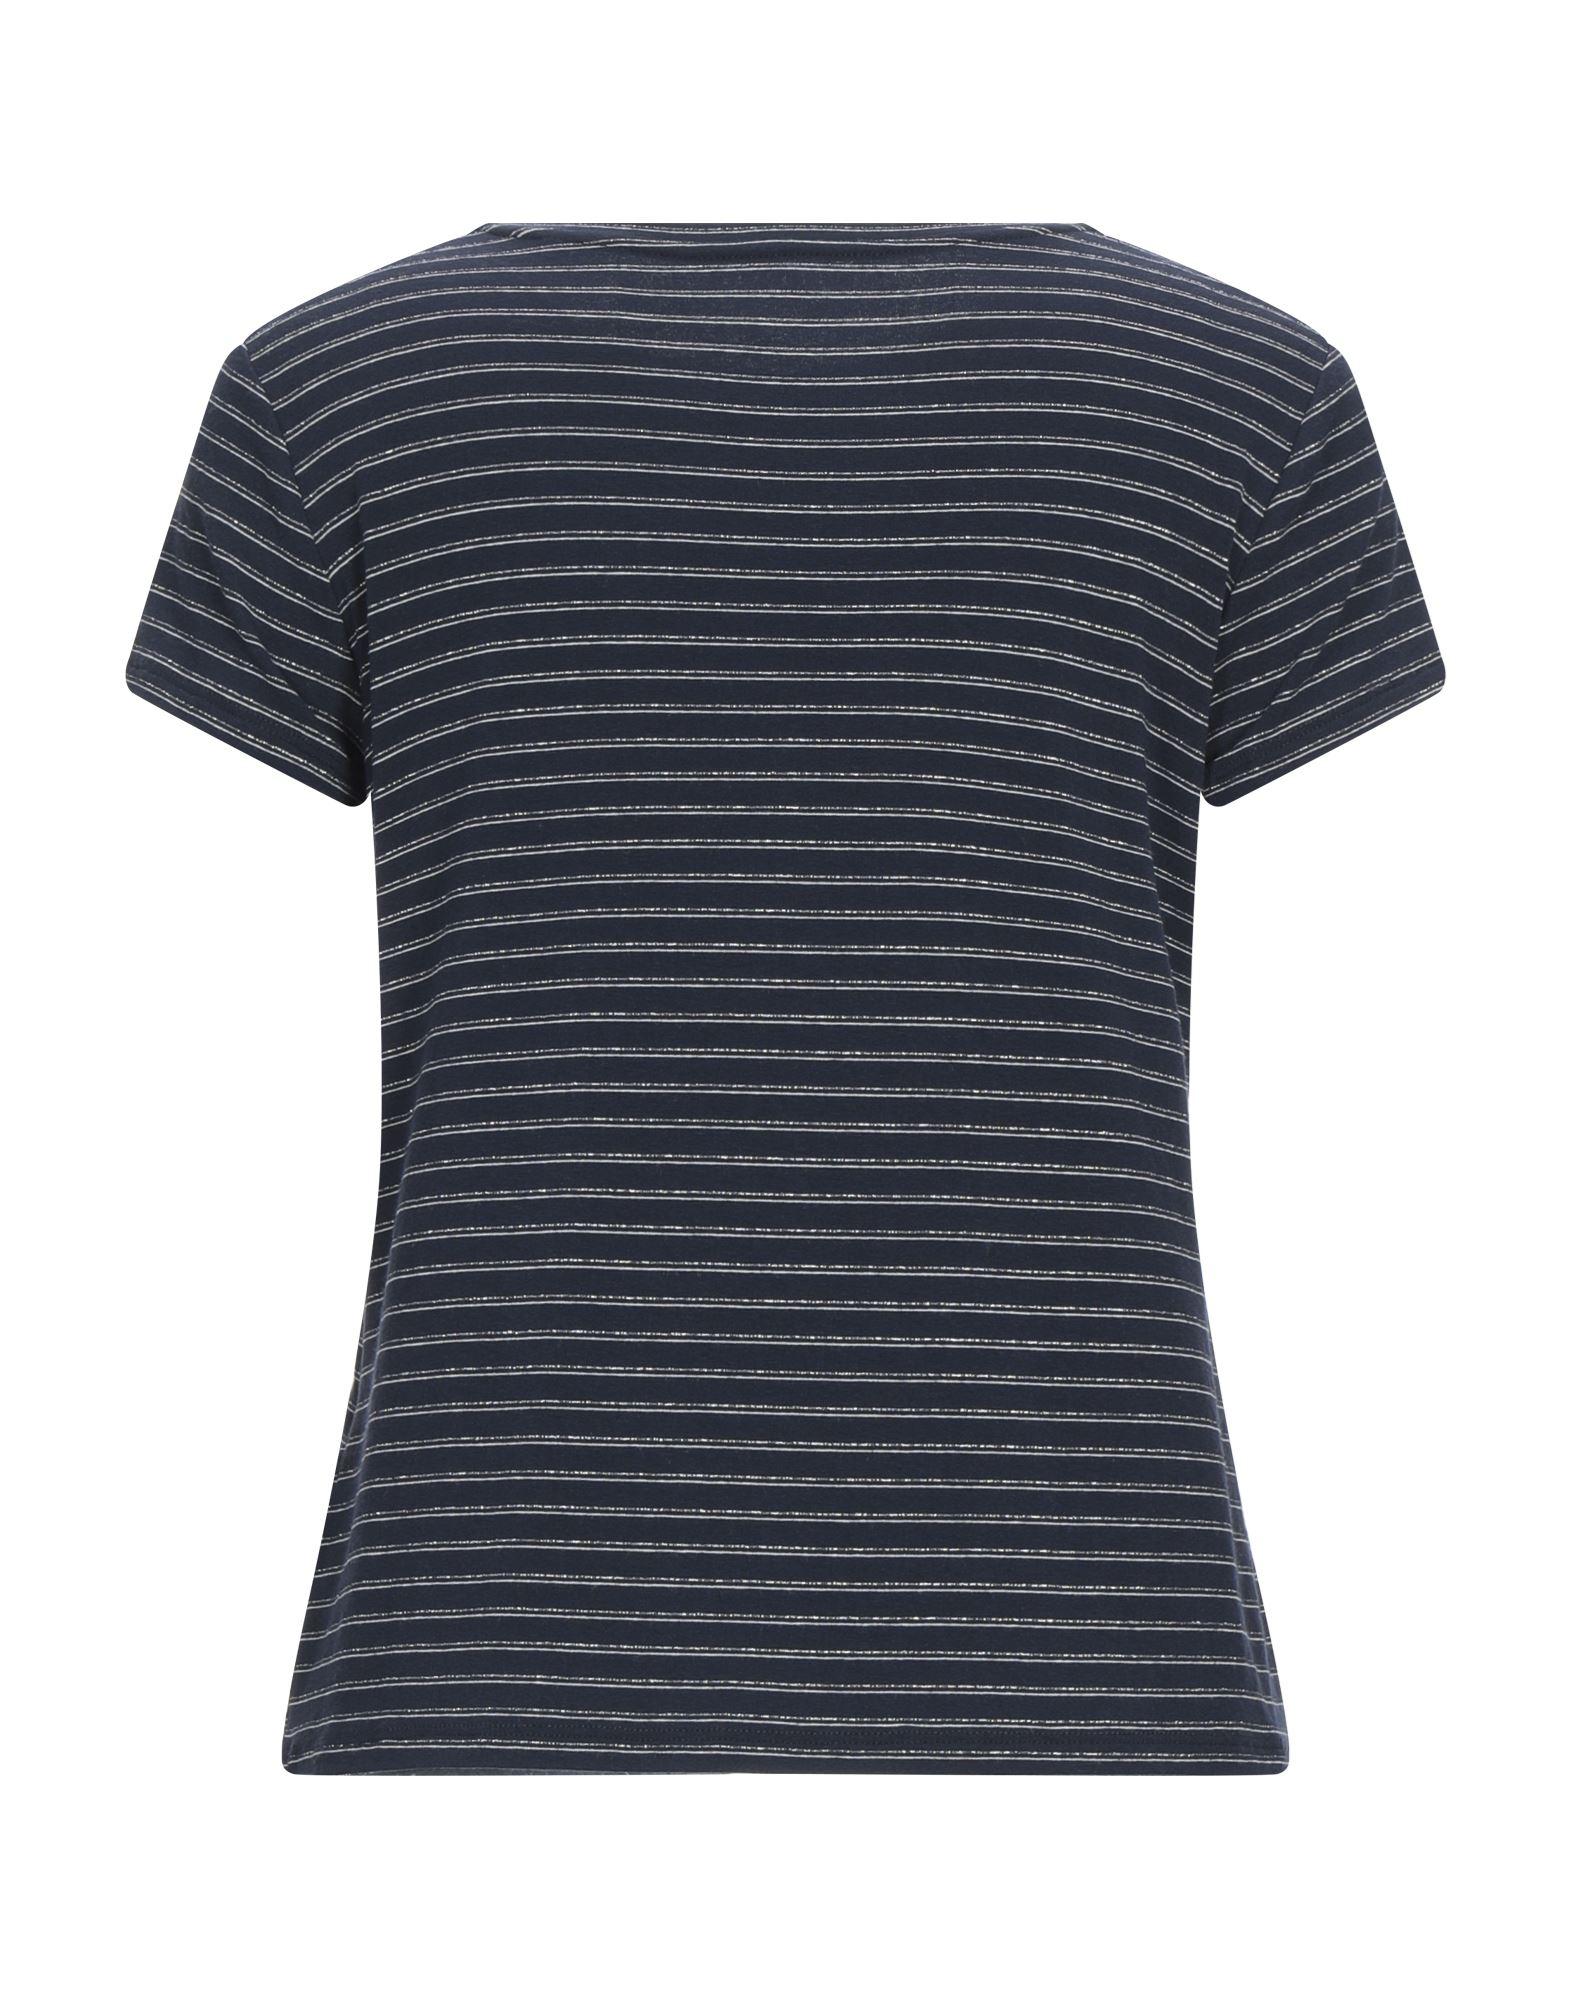 Purotatto Synthetic T-shirt in Dark Blue (Blue) - Lyst